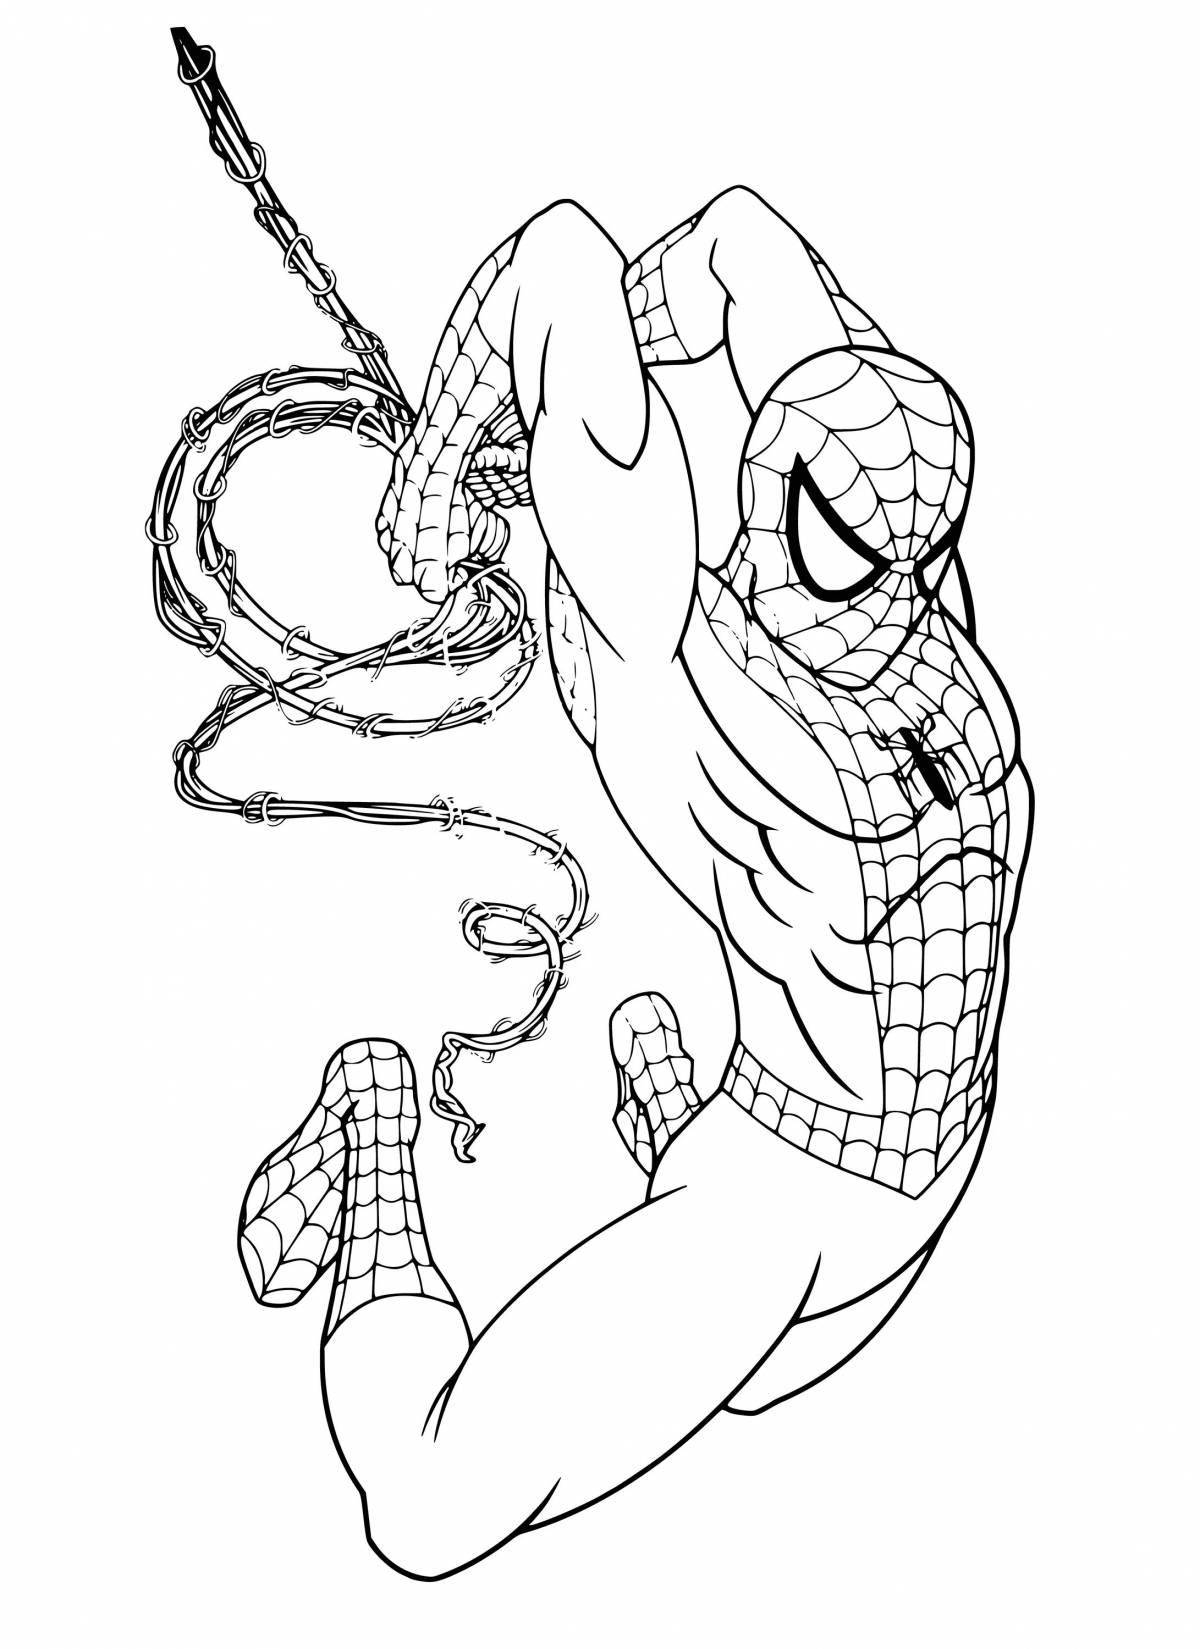 Marvel spiderman glitter coloring page